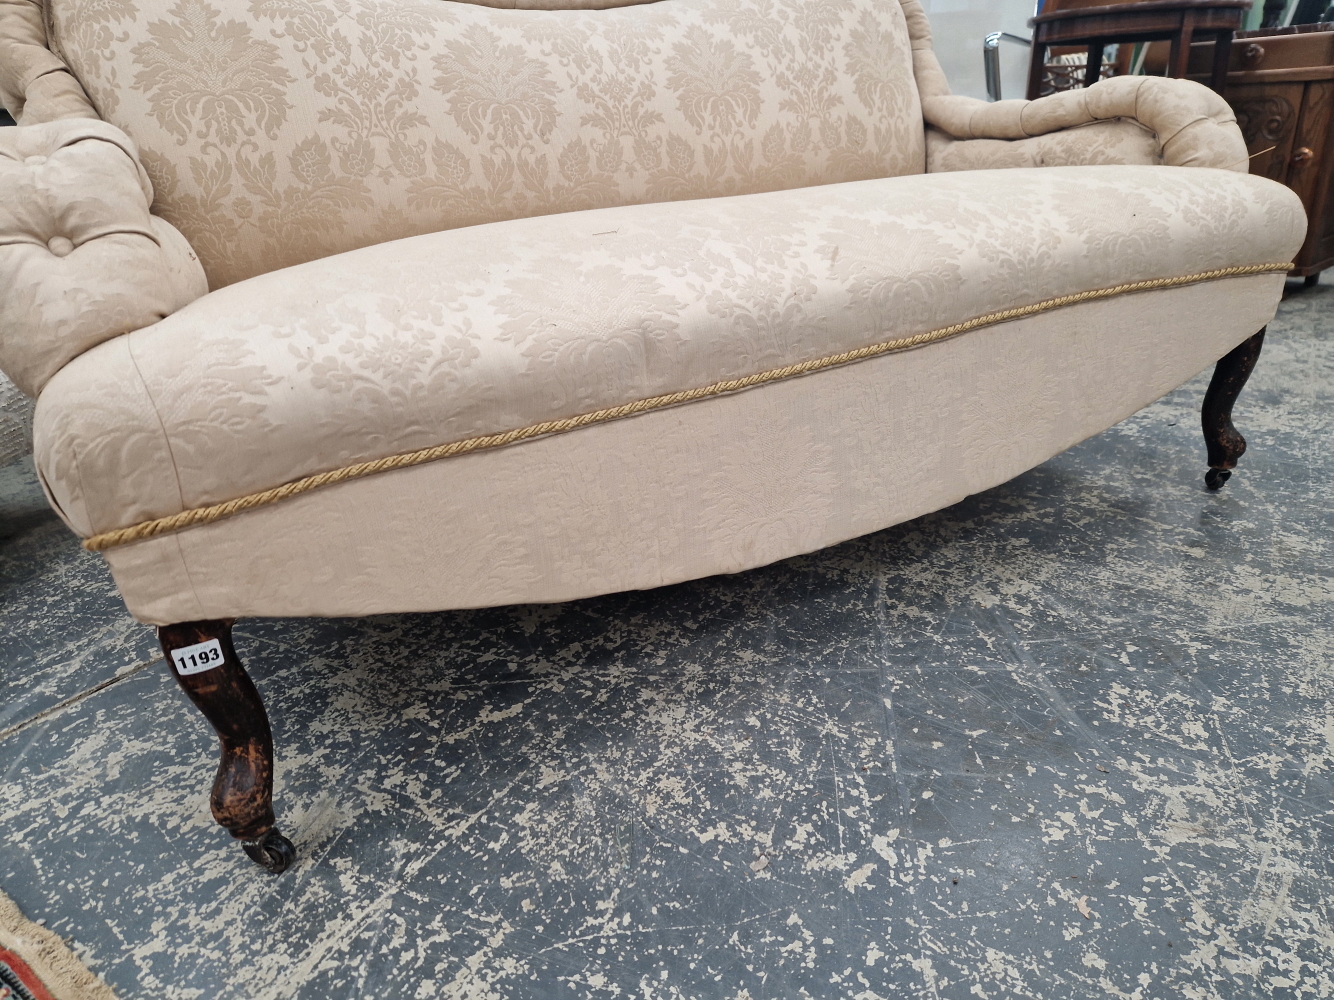 AN EDWARDIAN SMALL SALON SETTEE WITH BUTTON BACK UPHOLSTERY. - Image 2 of 4